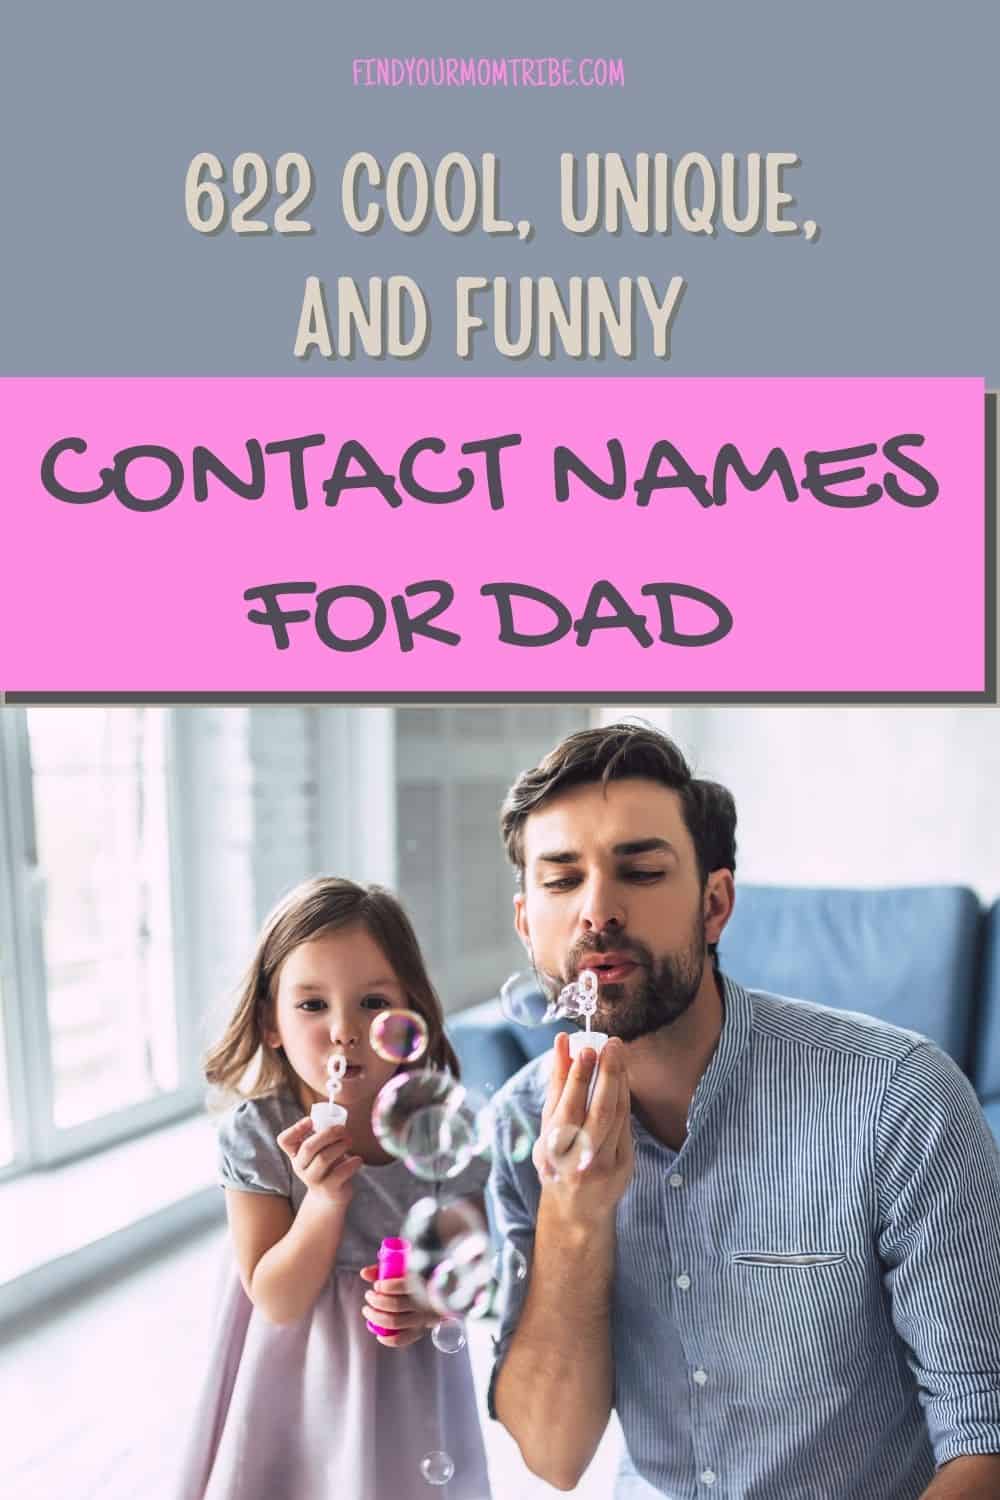 10 Cool, Unique, And Funny Contact Names For Dad